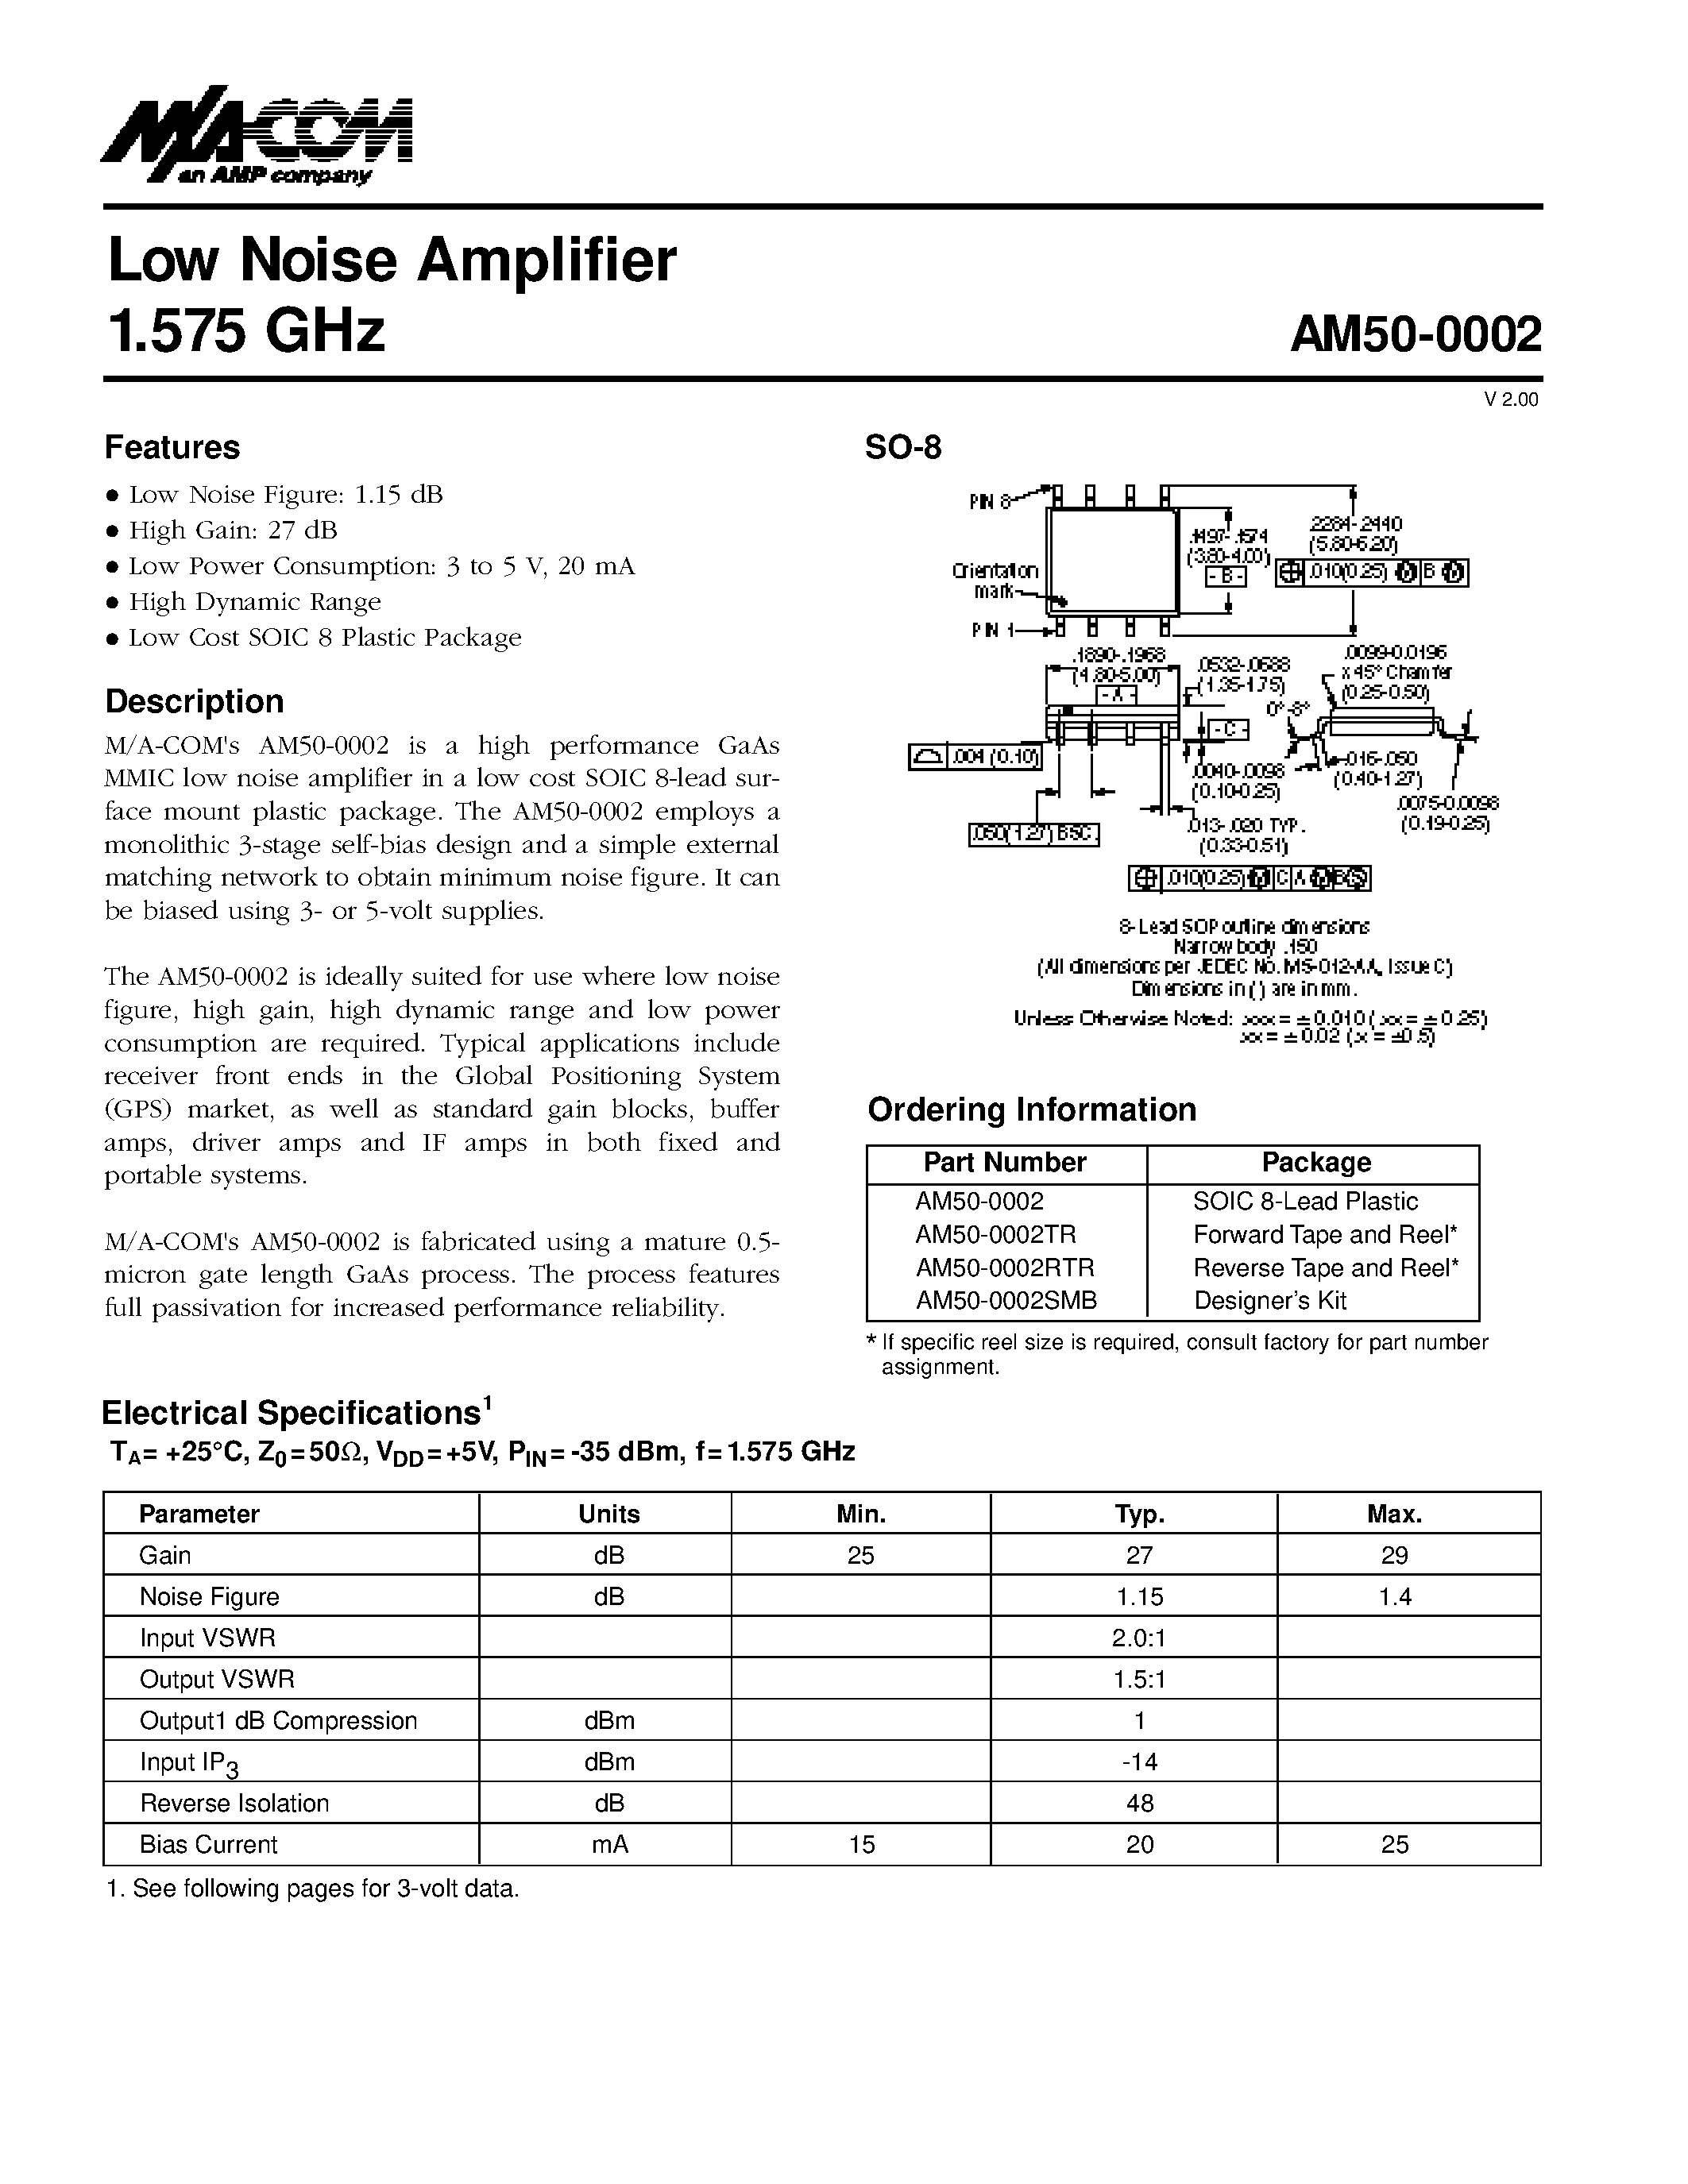 Datasheet AM50-0002SMB - Low Noise Amplifier 1.575 GHz page 1